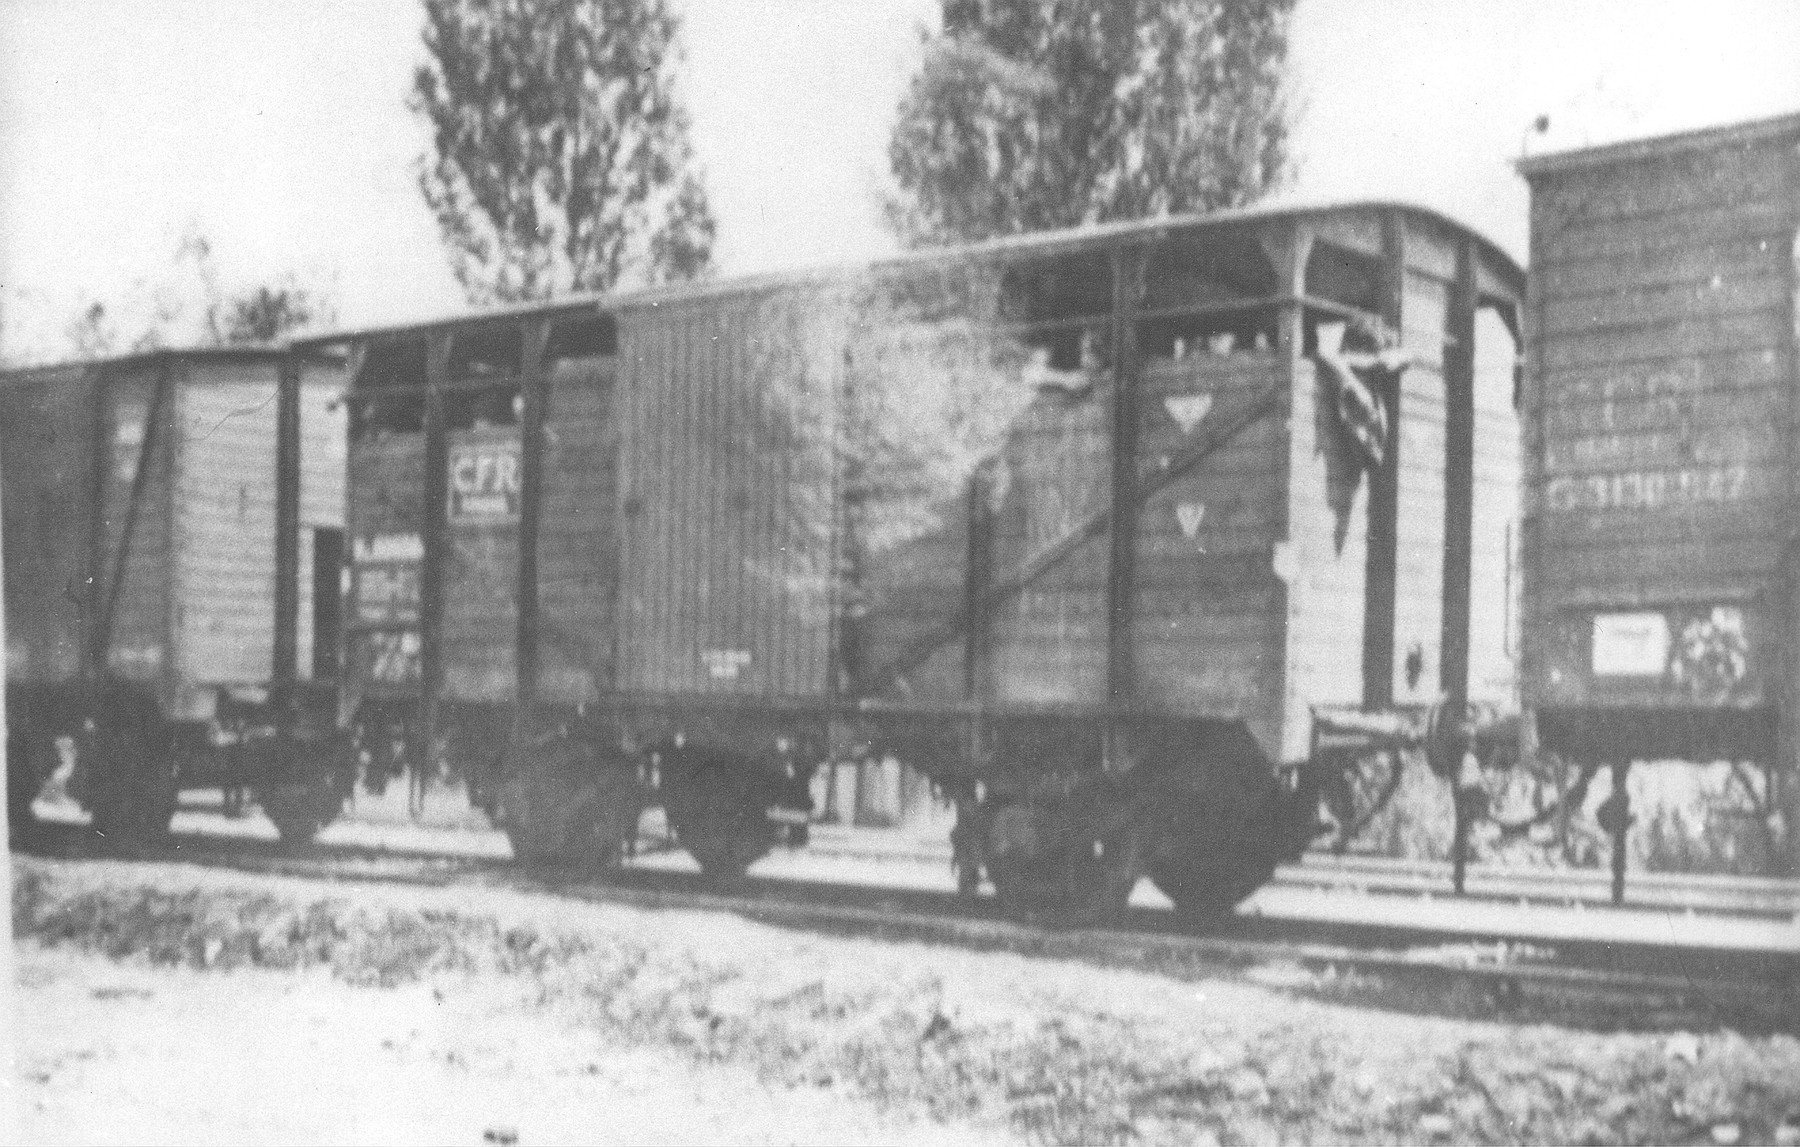 The Iasi-Calarasi death train at the railroad station in Targu-Frumos.

At Targu-Frumos the command of the train guard was taken over by 2nd Lt. Aurel Triandaf, assisted by Sgt. Maj. Anastase Bratu.